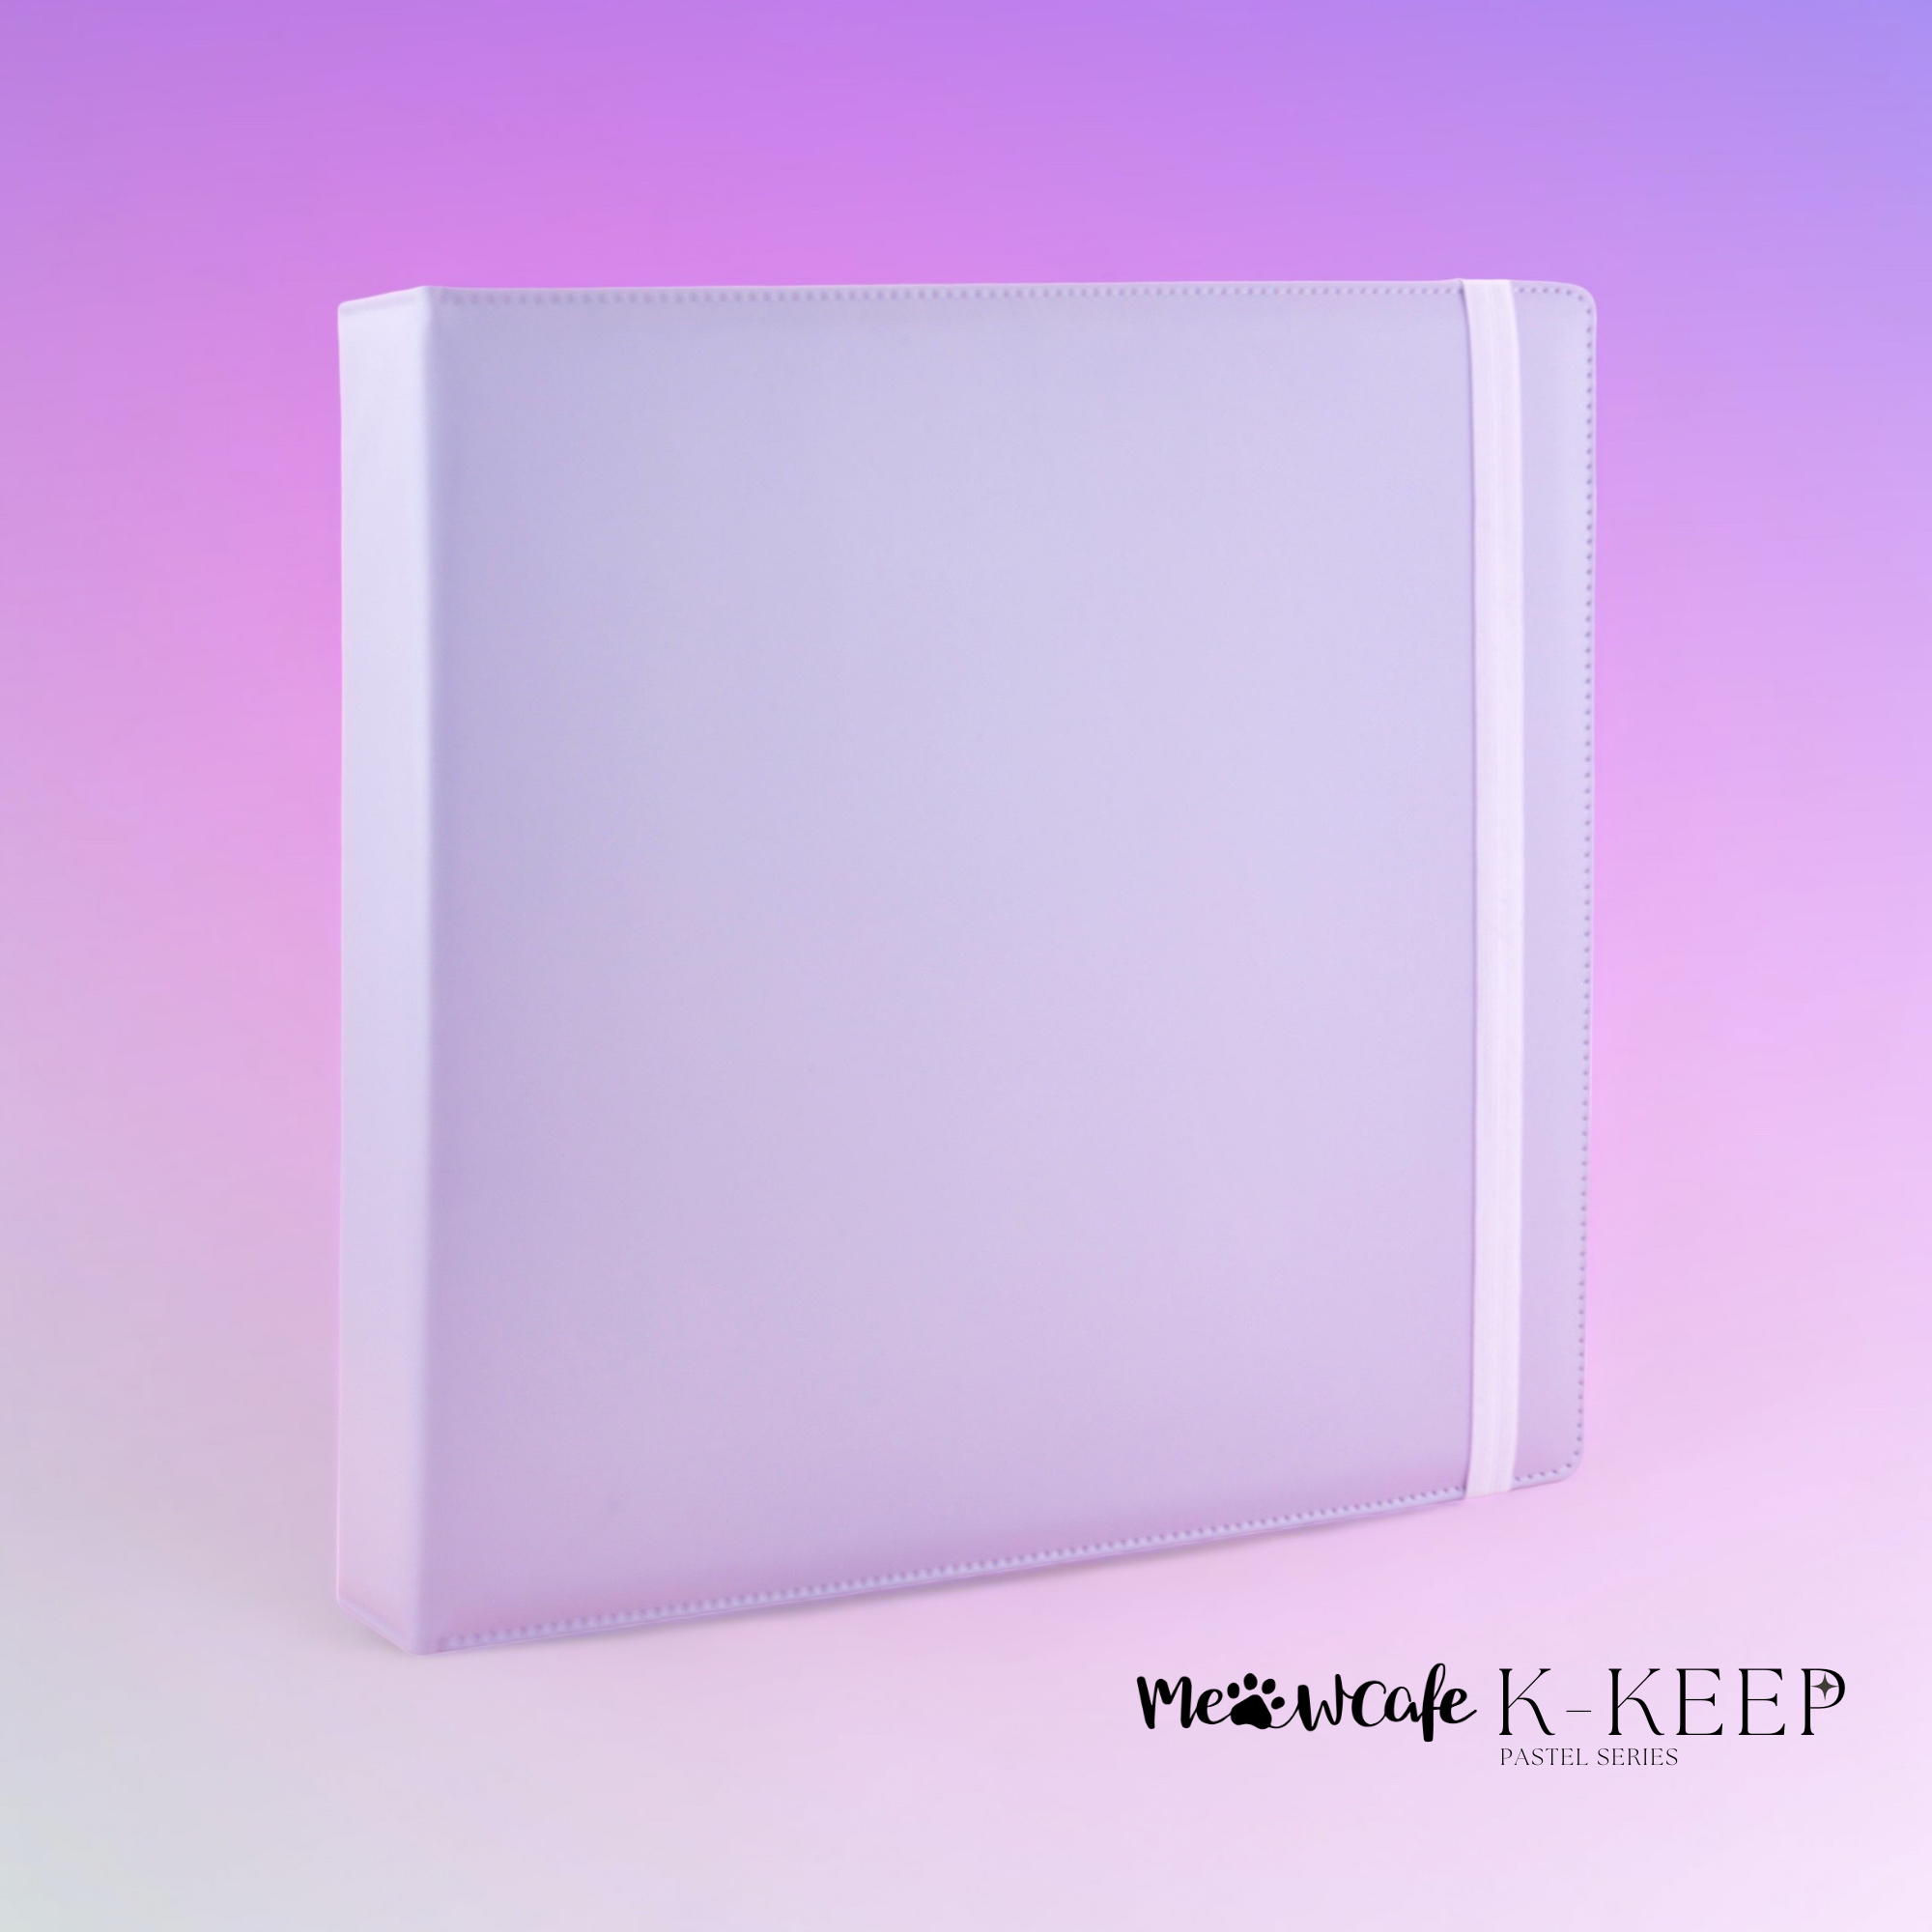 Limited Stock] K-KEEP [A4 Plus Extra Wide] Binder - [2 Inch] - [Minim –  MeowCafeShop